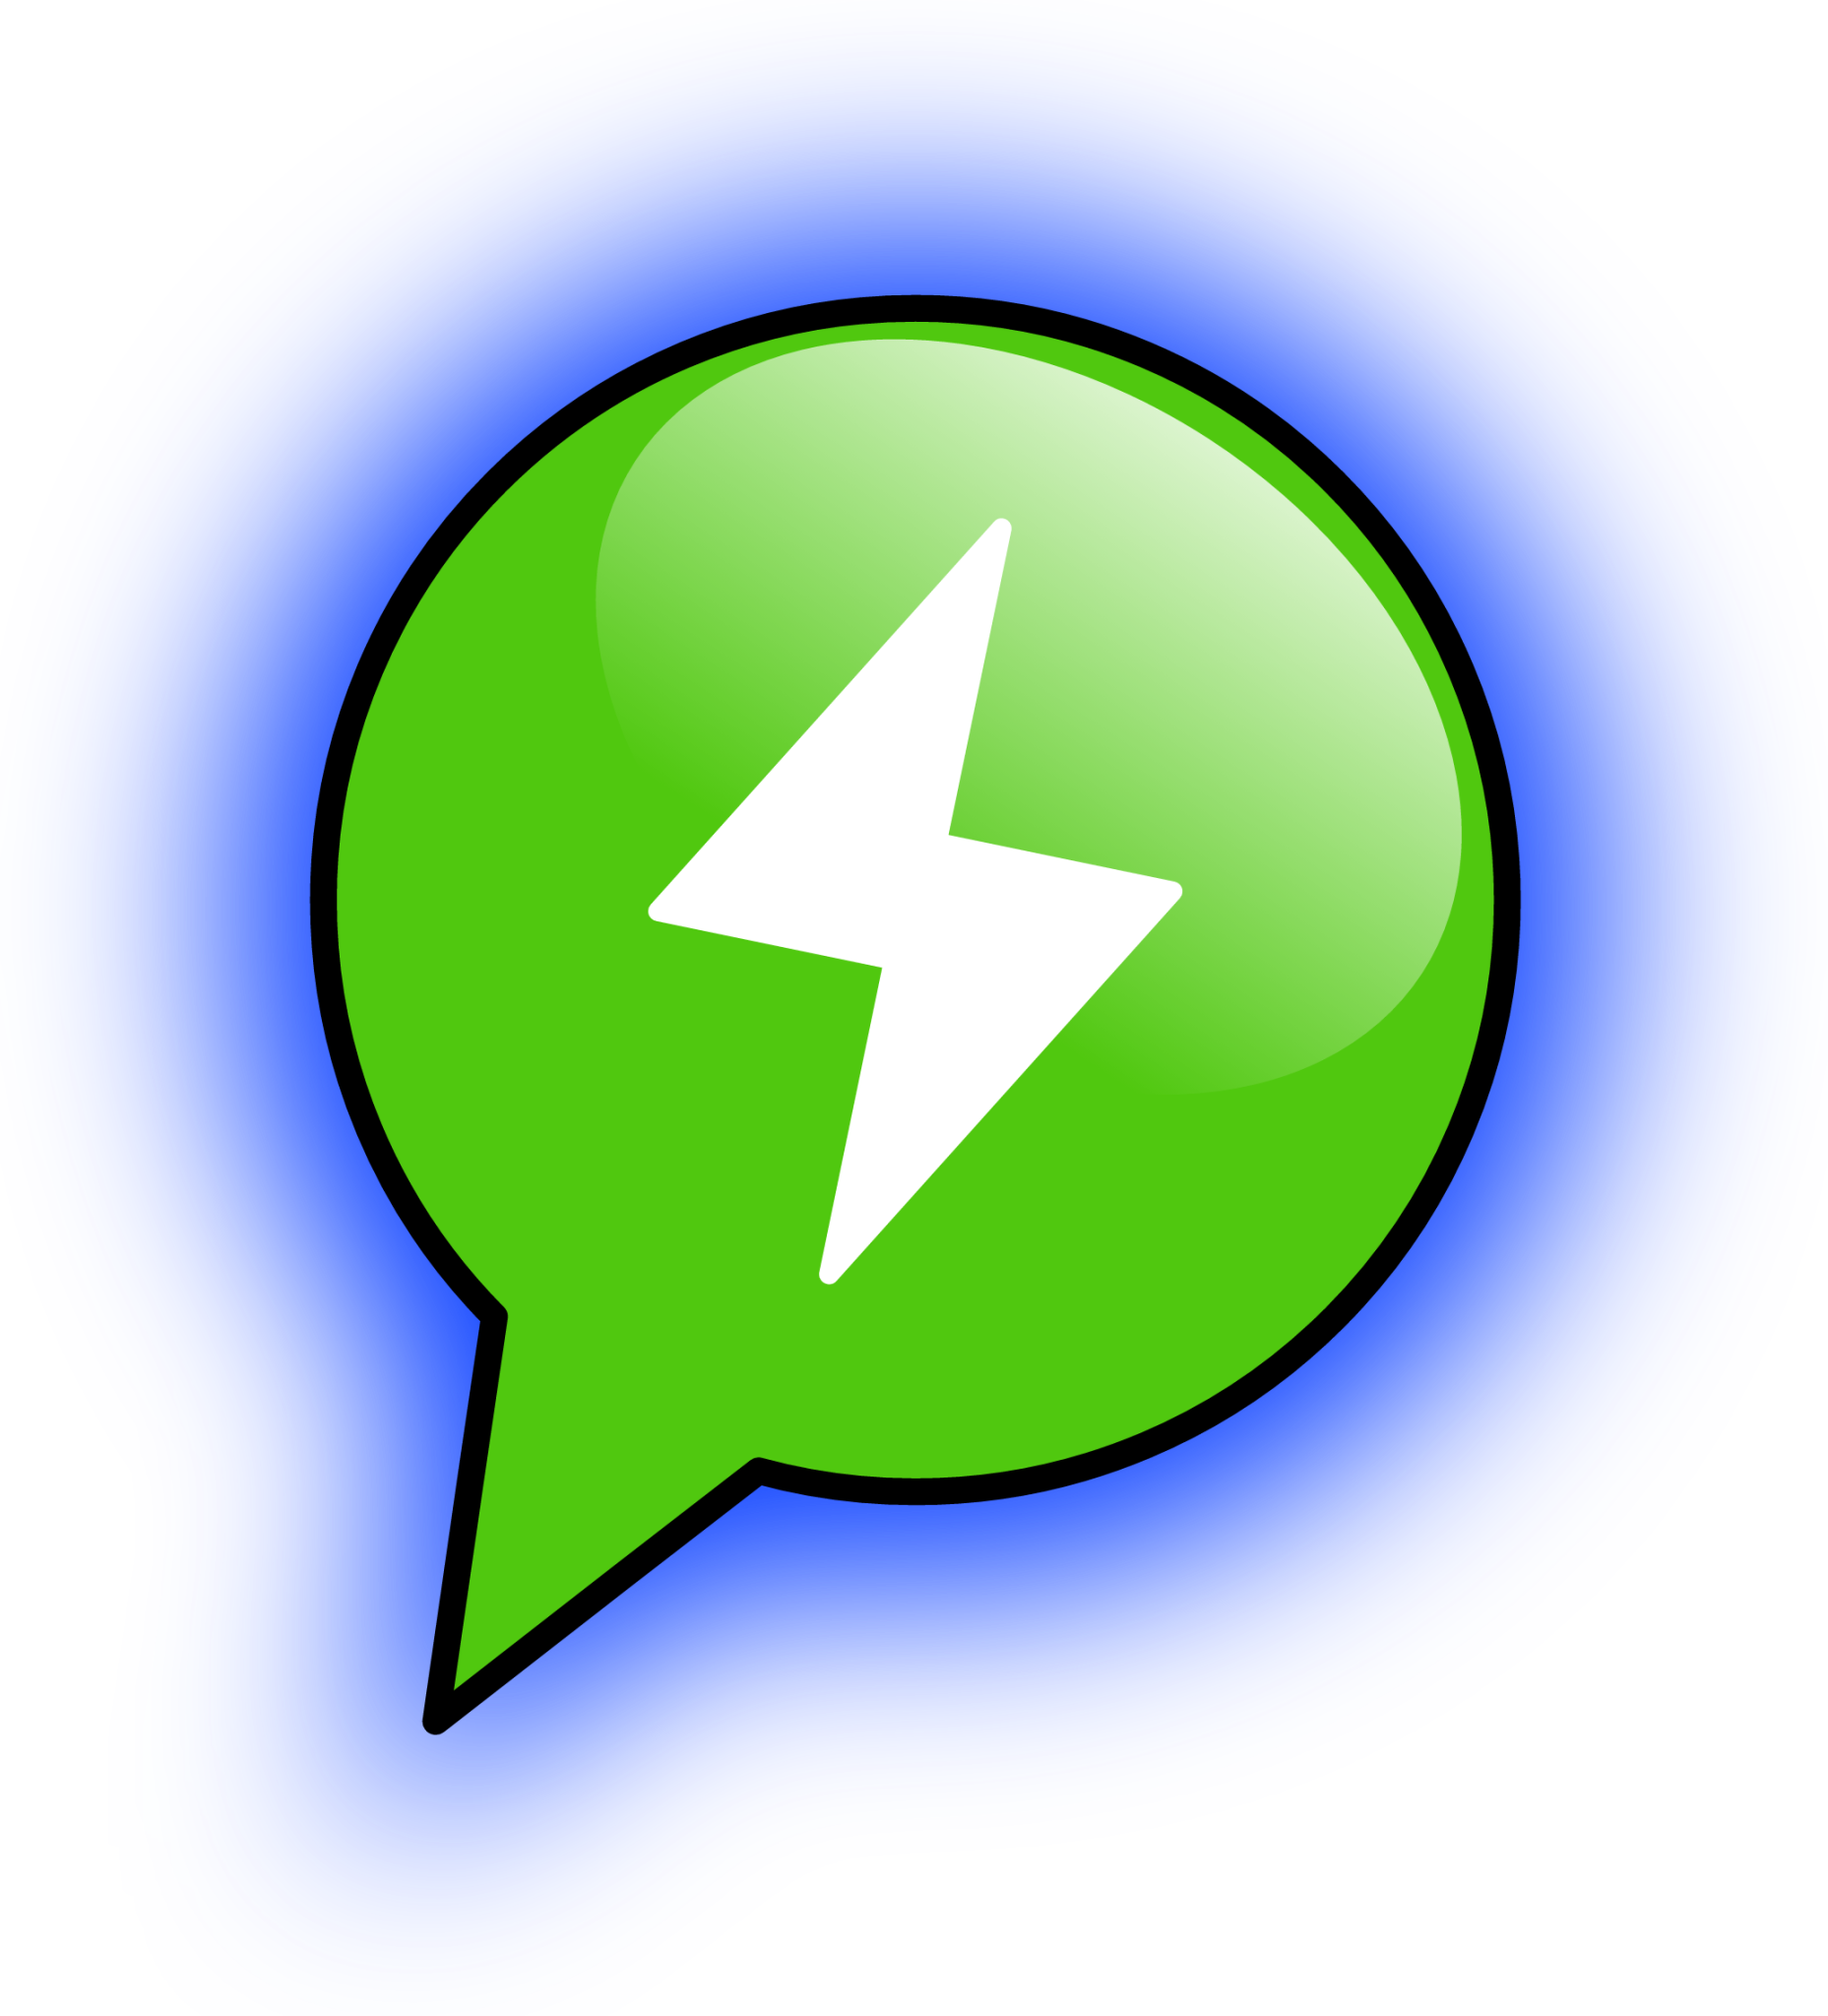 tip green icon